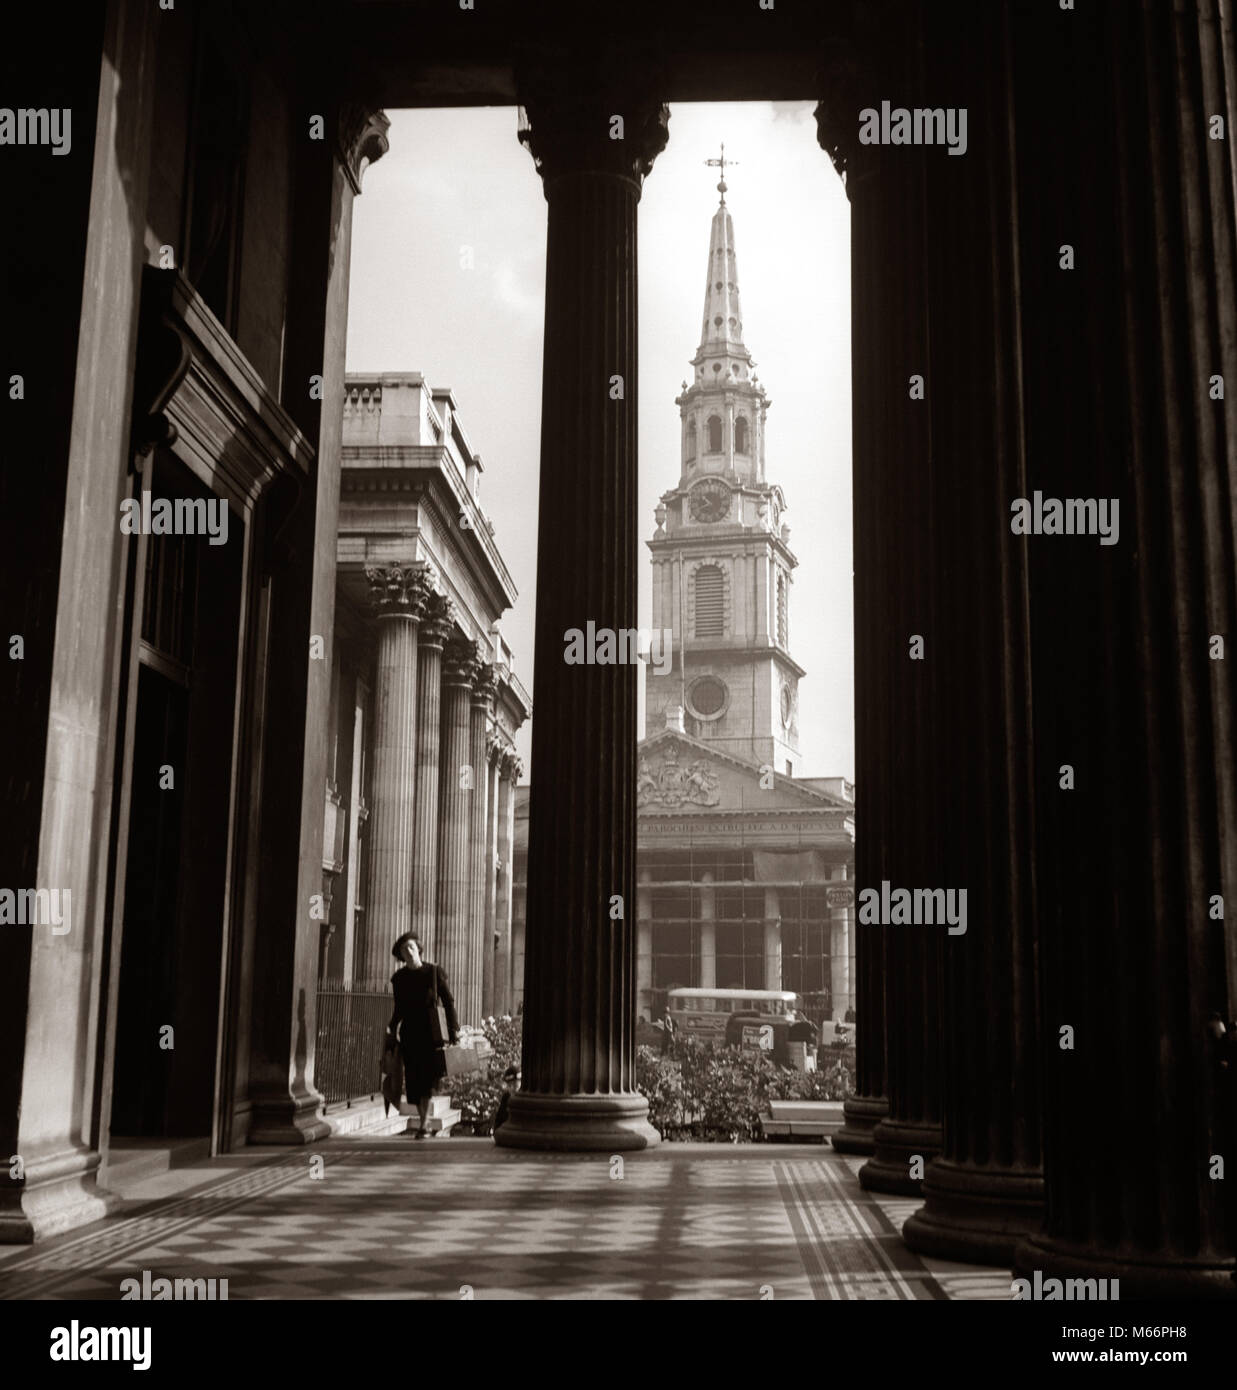 1930s ANONYMOUS SILHOUETTED WOMAN WALKING COLONNADE ST. MARTINS IN THE FIELD CHURCH LONDON ENGLAND - r7521 HAR001 HARS HISTORIC SUCCESS HAPPINESS ADVENTURE SILHOUETTED COLUMN EXCITEMENT KNOWLEDGE RECREATION TOURIST DIRECTION COLUMNS HOLIDAYS TOURISTS TRAVELING ST. VACATIONS VISITING ANONYMOUS TRAVEL EUROPE TRAVELER ARCHITECTURAL DETAIL MID-ADULT MID-ADULT WOMAN RESORTS B&W BLACK AND WHITE CAPITAL CITY COLONNADE FEMALES] MARTINS OLD FASHIONED PERSONS ST. MARTINS IN THE FIELD Stock Photo